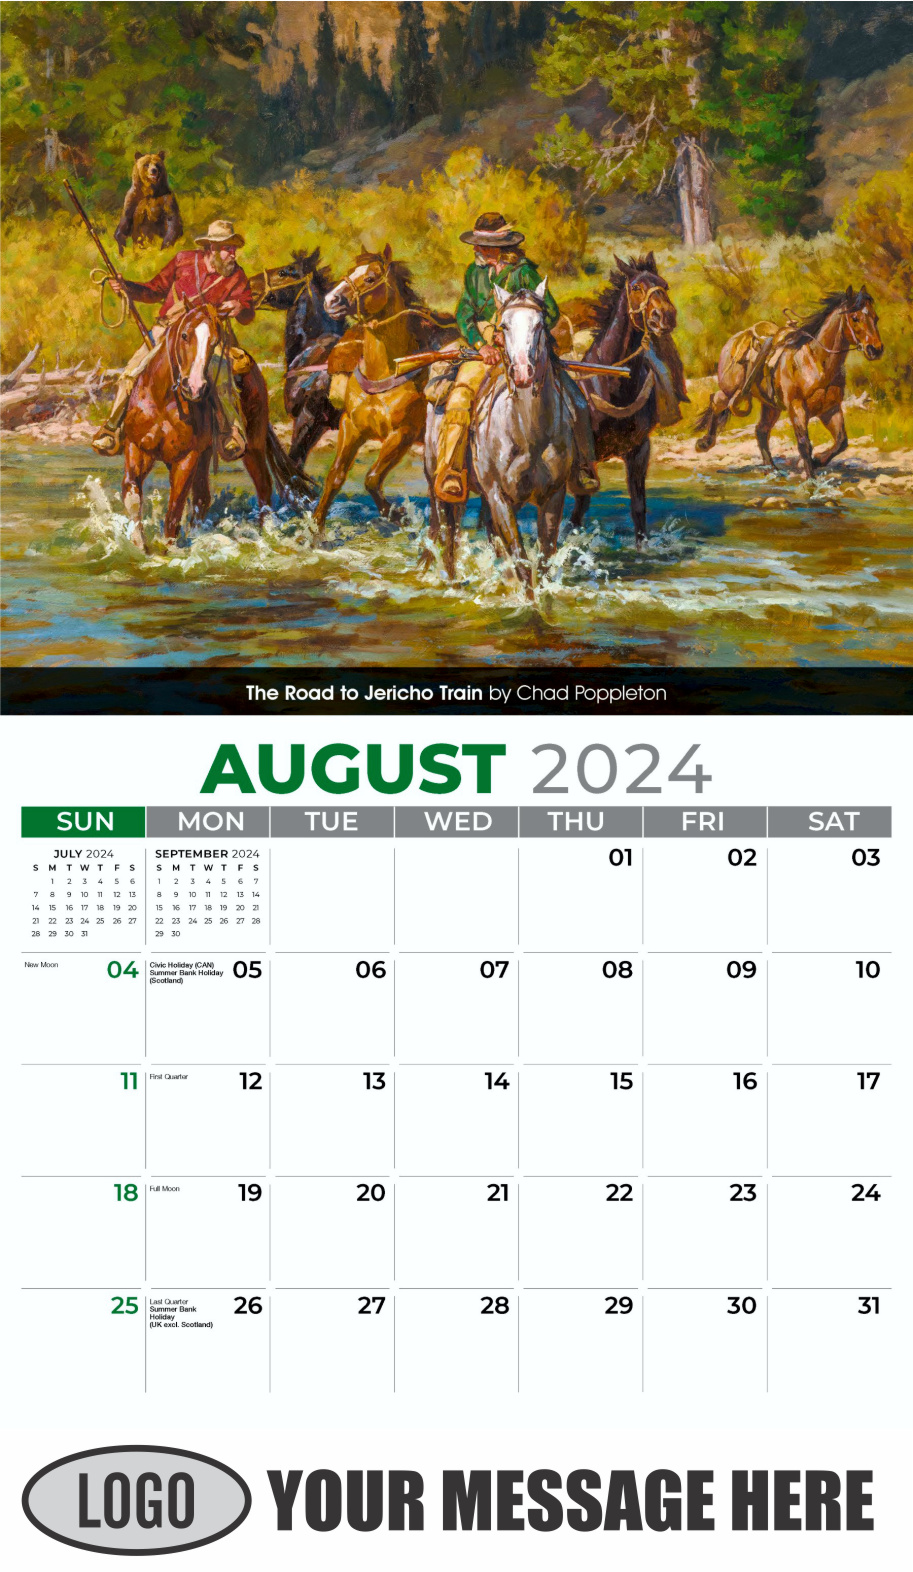 Spirit of the Old West 2024 Old West Art Business Promo Wall Calendar - August